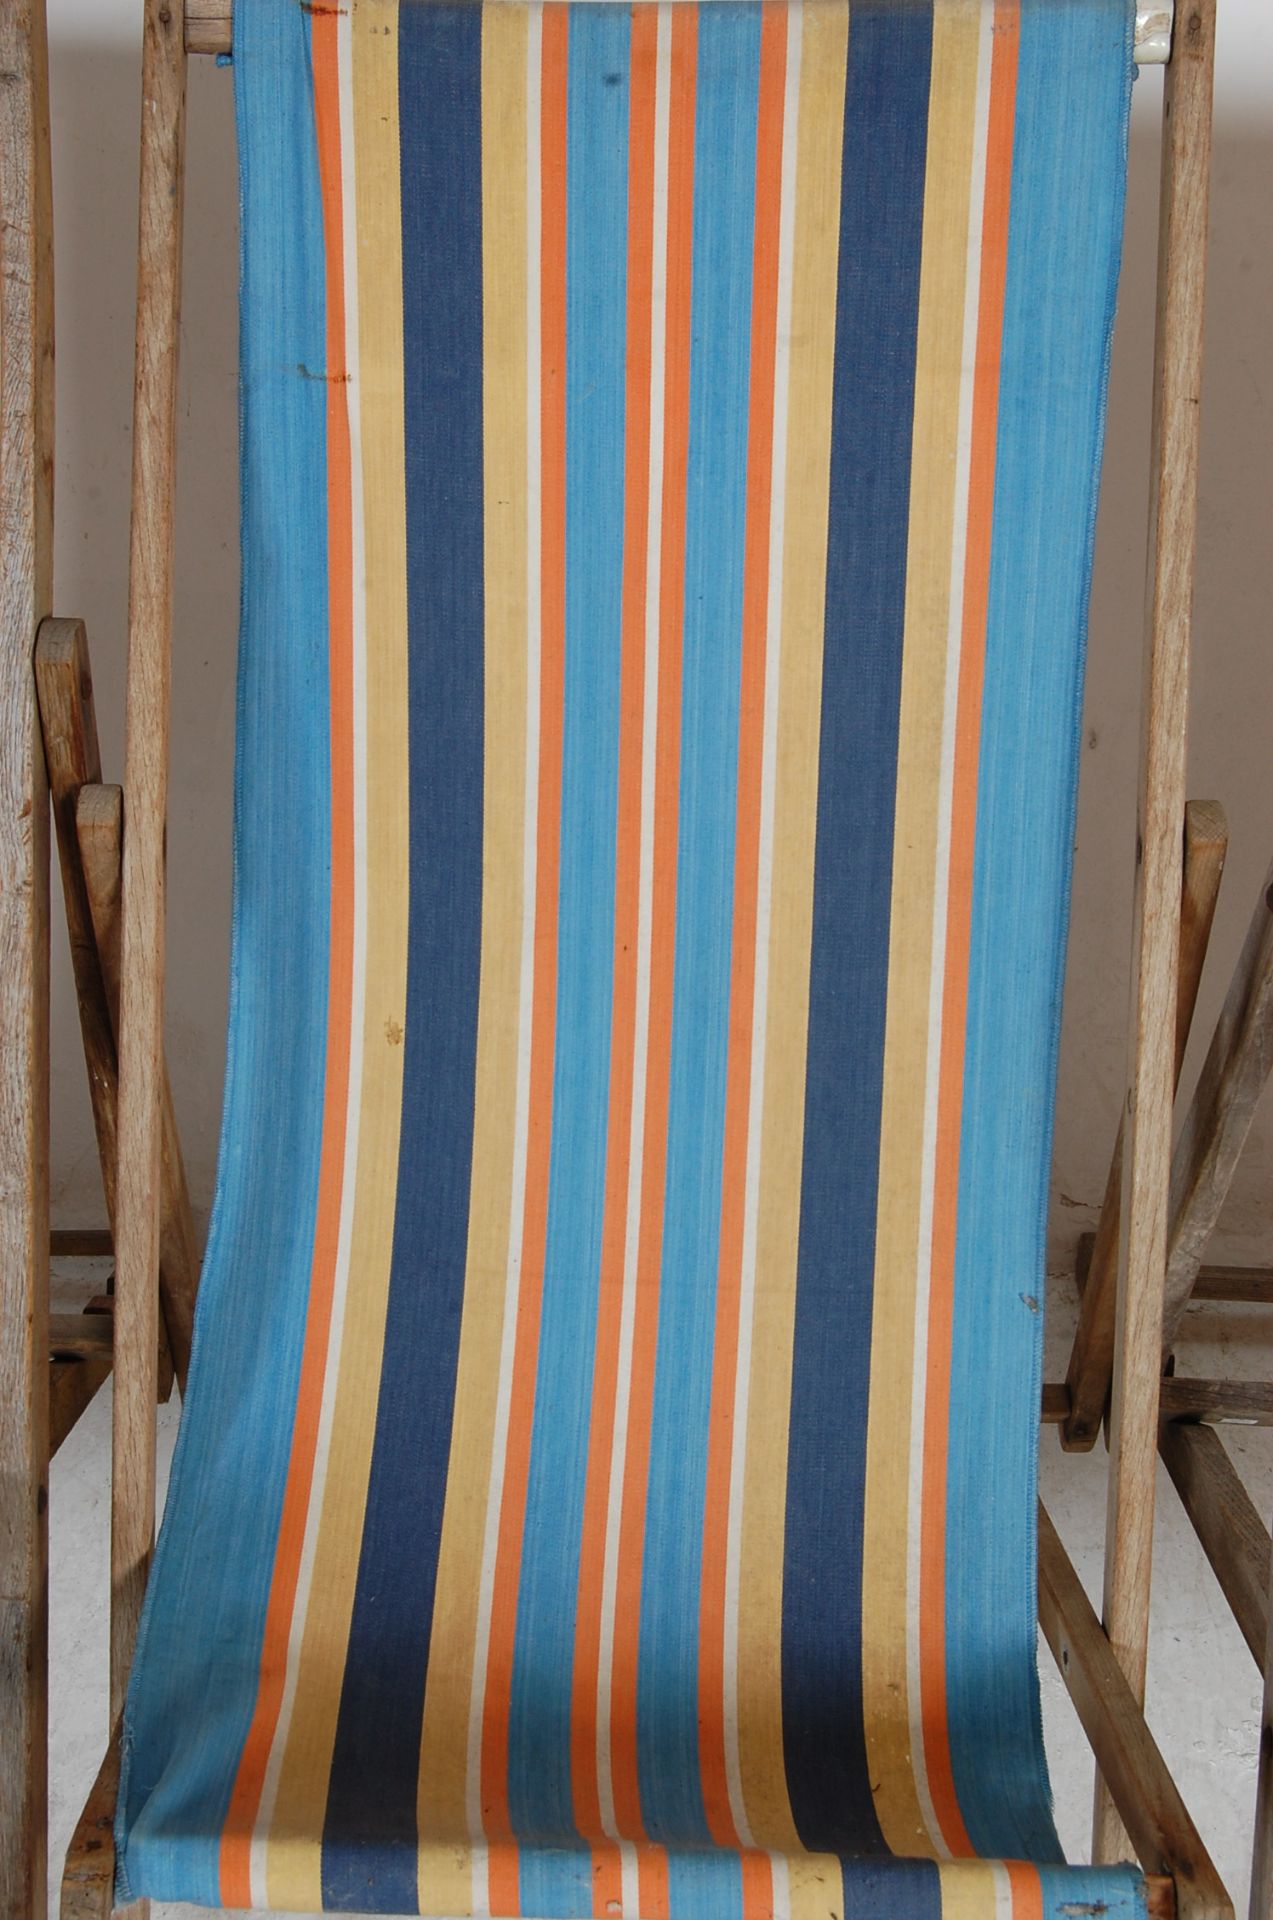 COLLECTION OF FOUR VINTAGE FOLDING DECK CHAIRS - Image 8 of 9